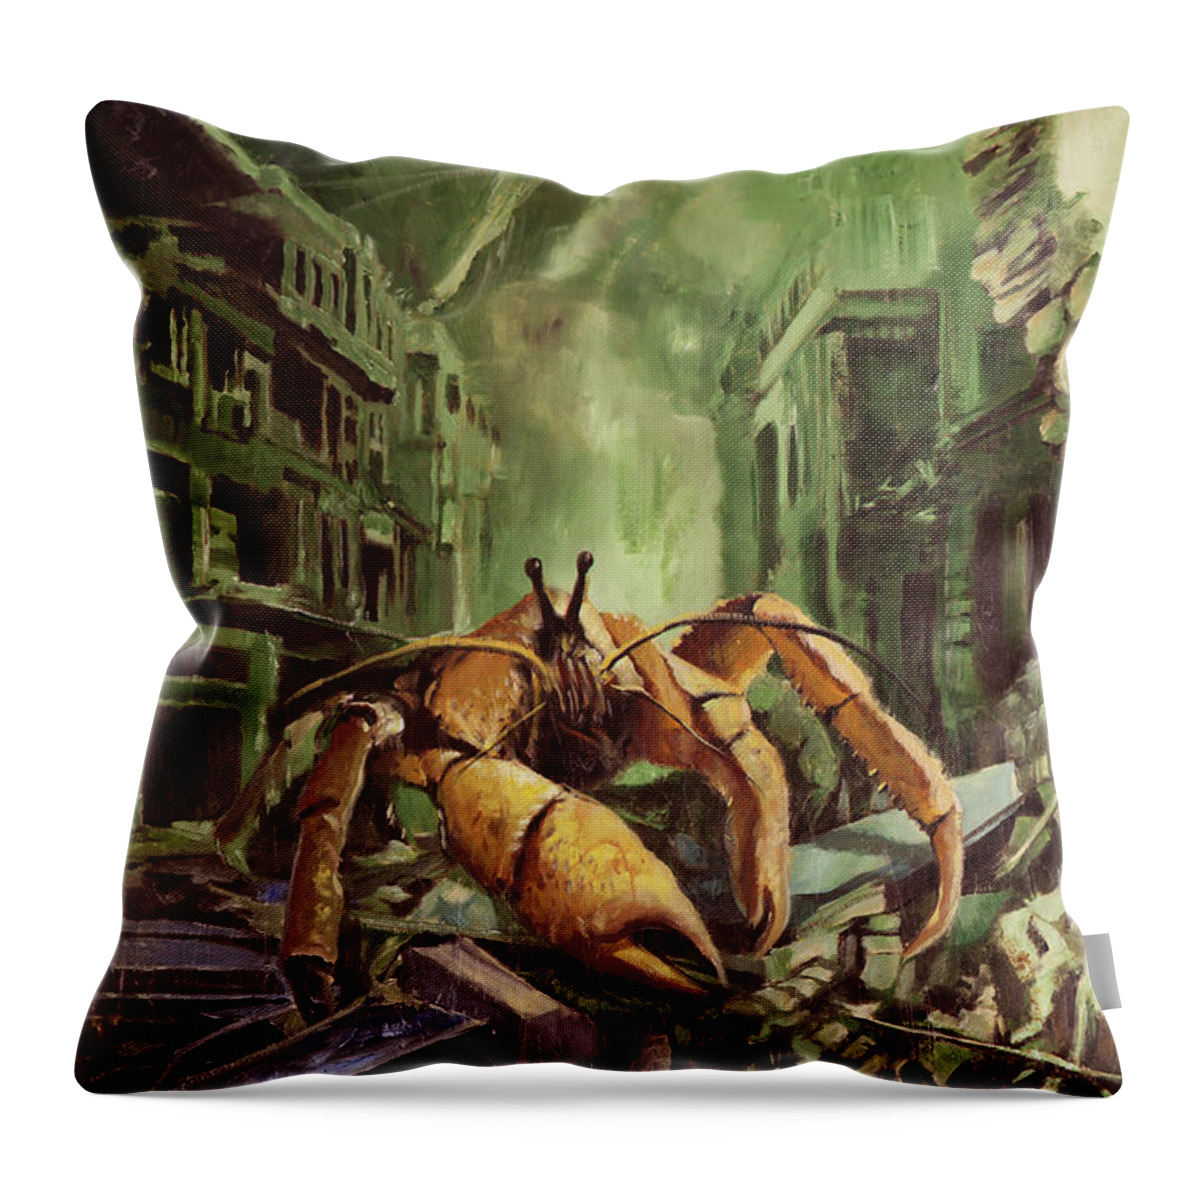 Destruction Throw Pillow featuring the painting The Final Judgement by Sv Bell